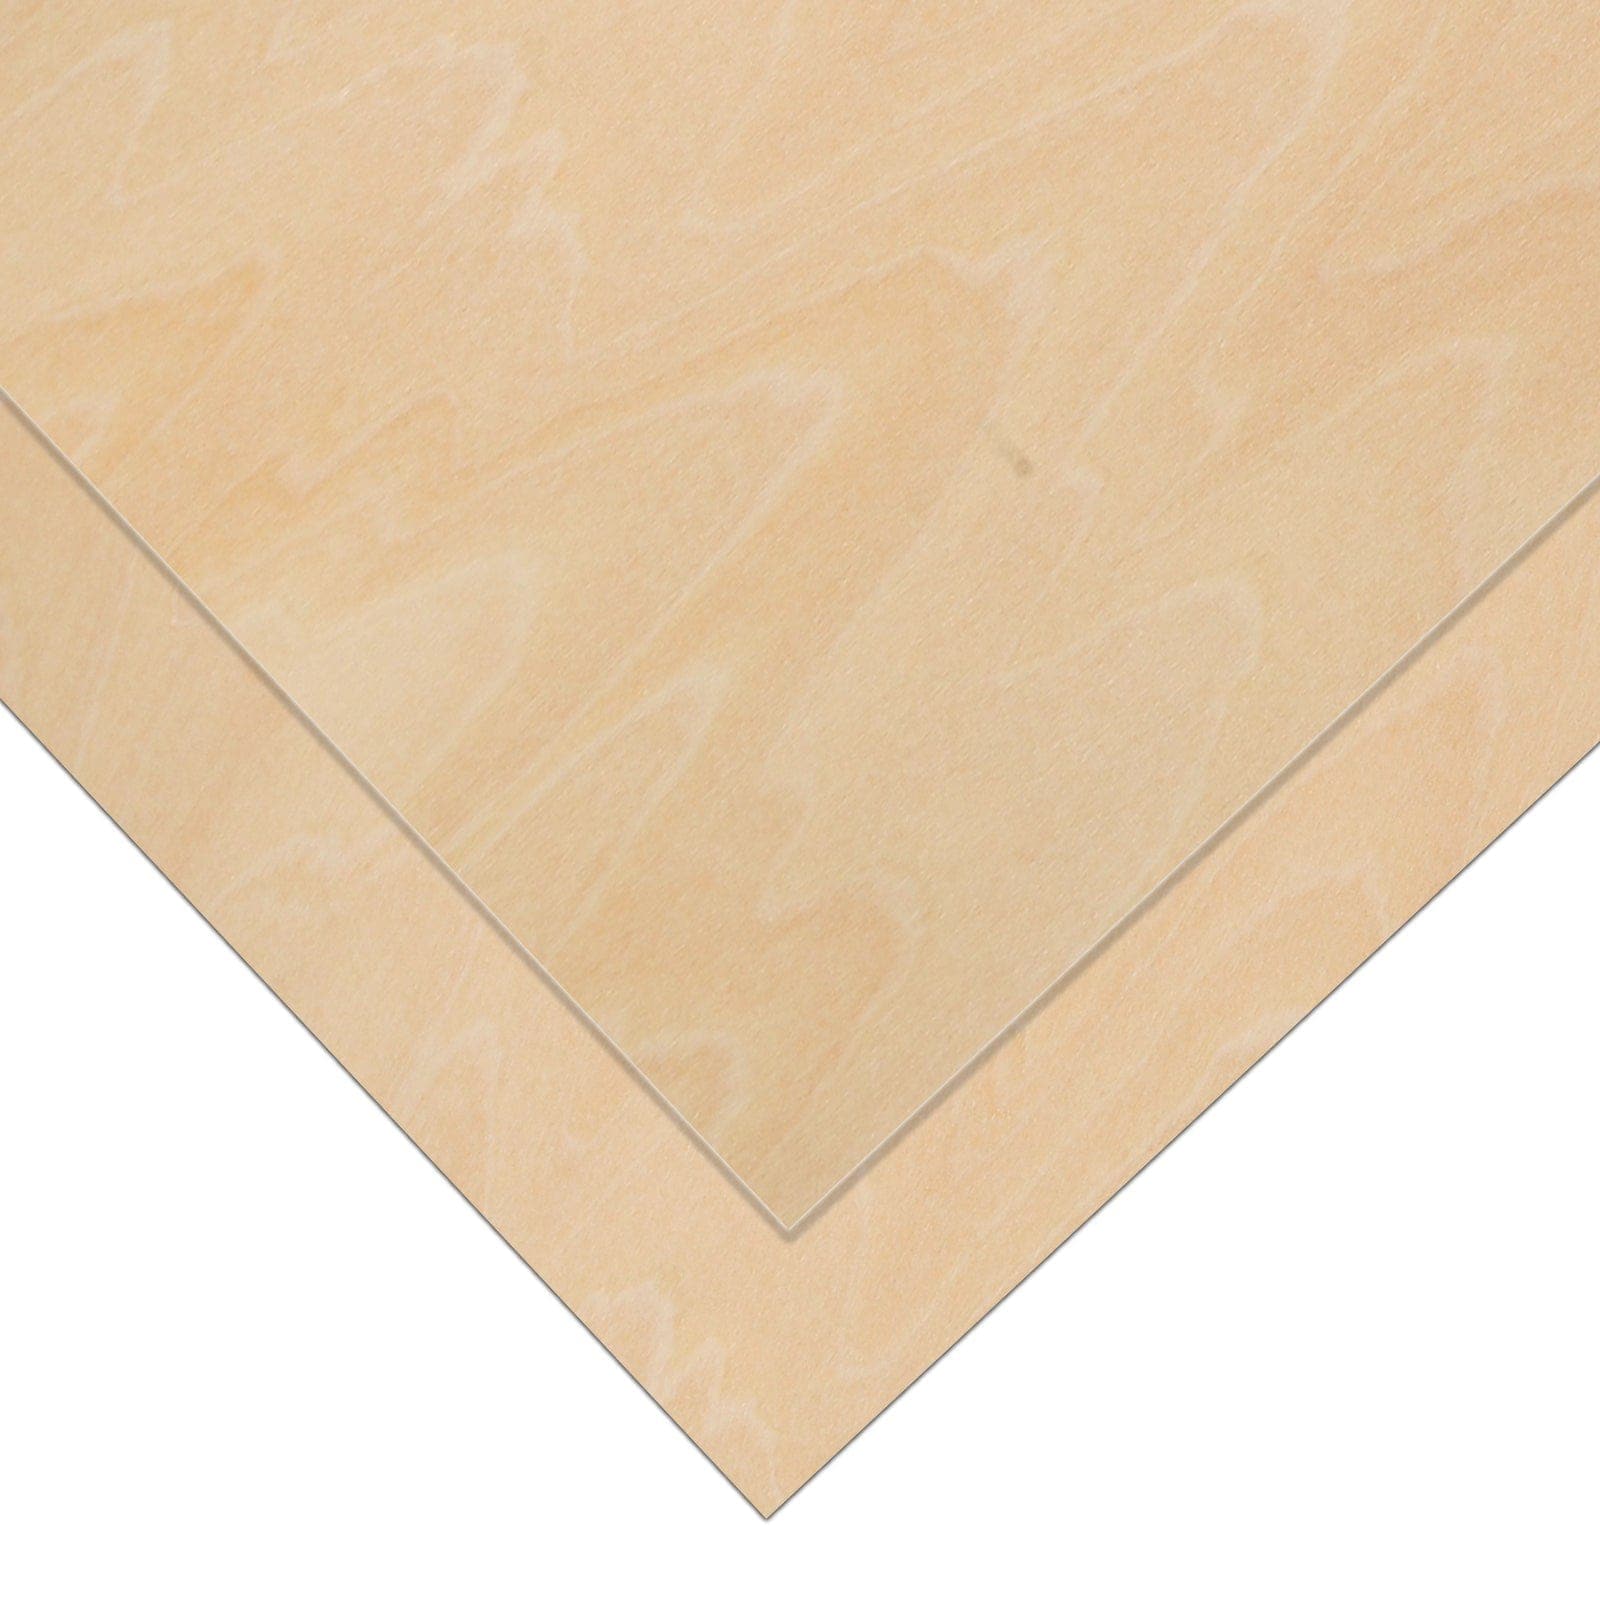 3mm Thickness Basswood plywood – sculpfun